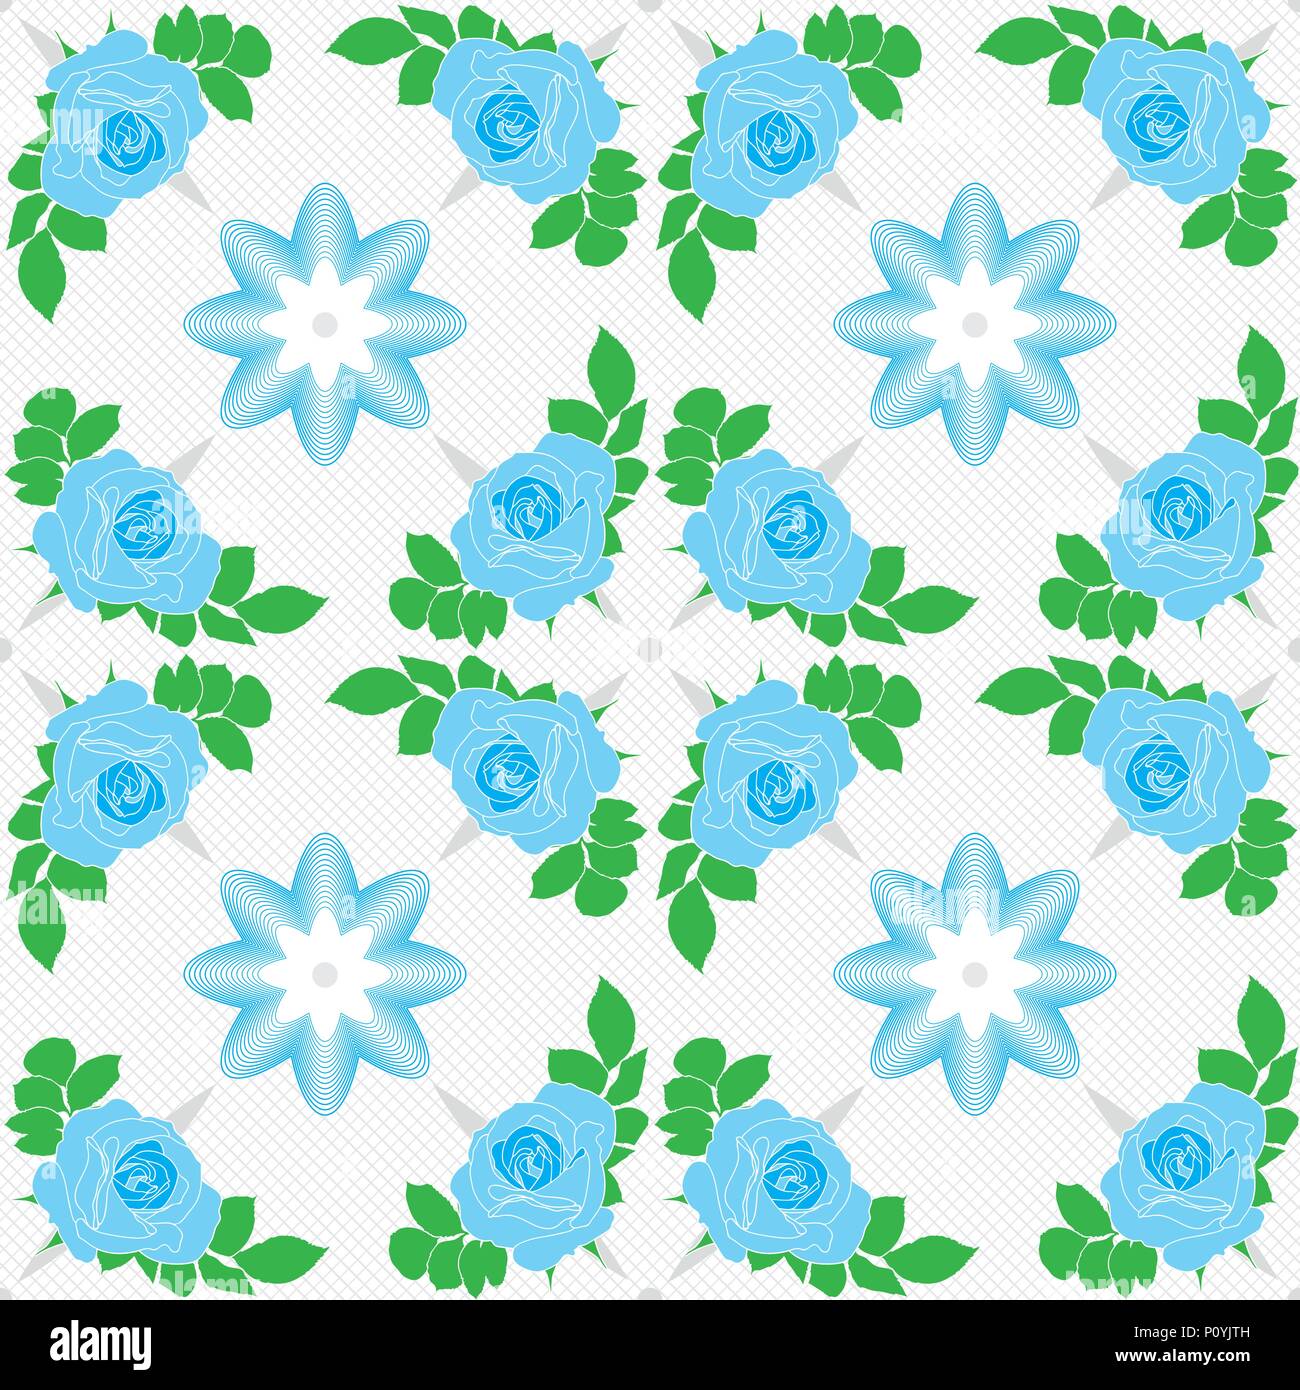 Vector seamless pattern. Blue roses on white background with geometric decoration. Stock Vector